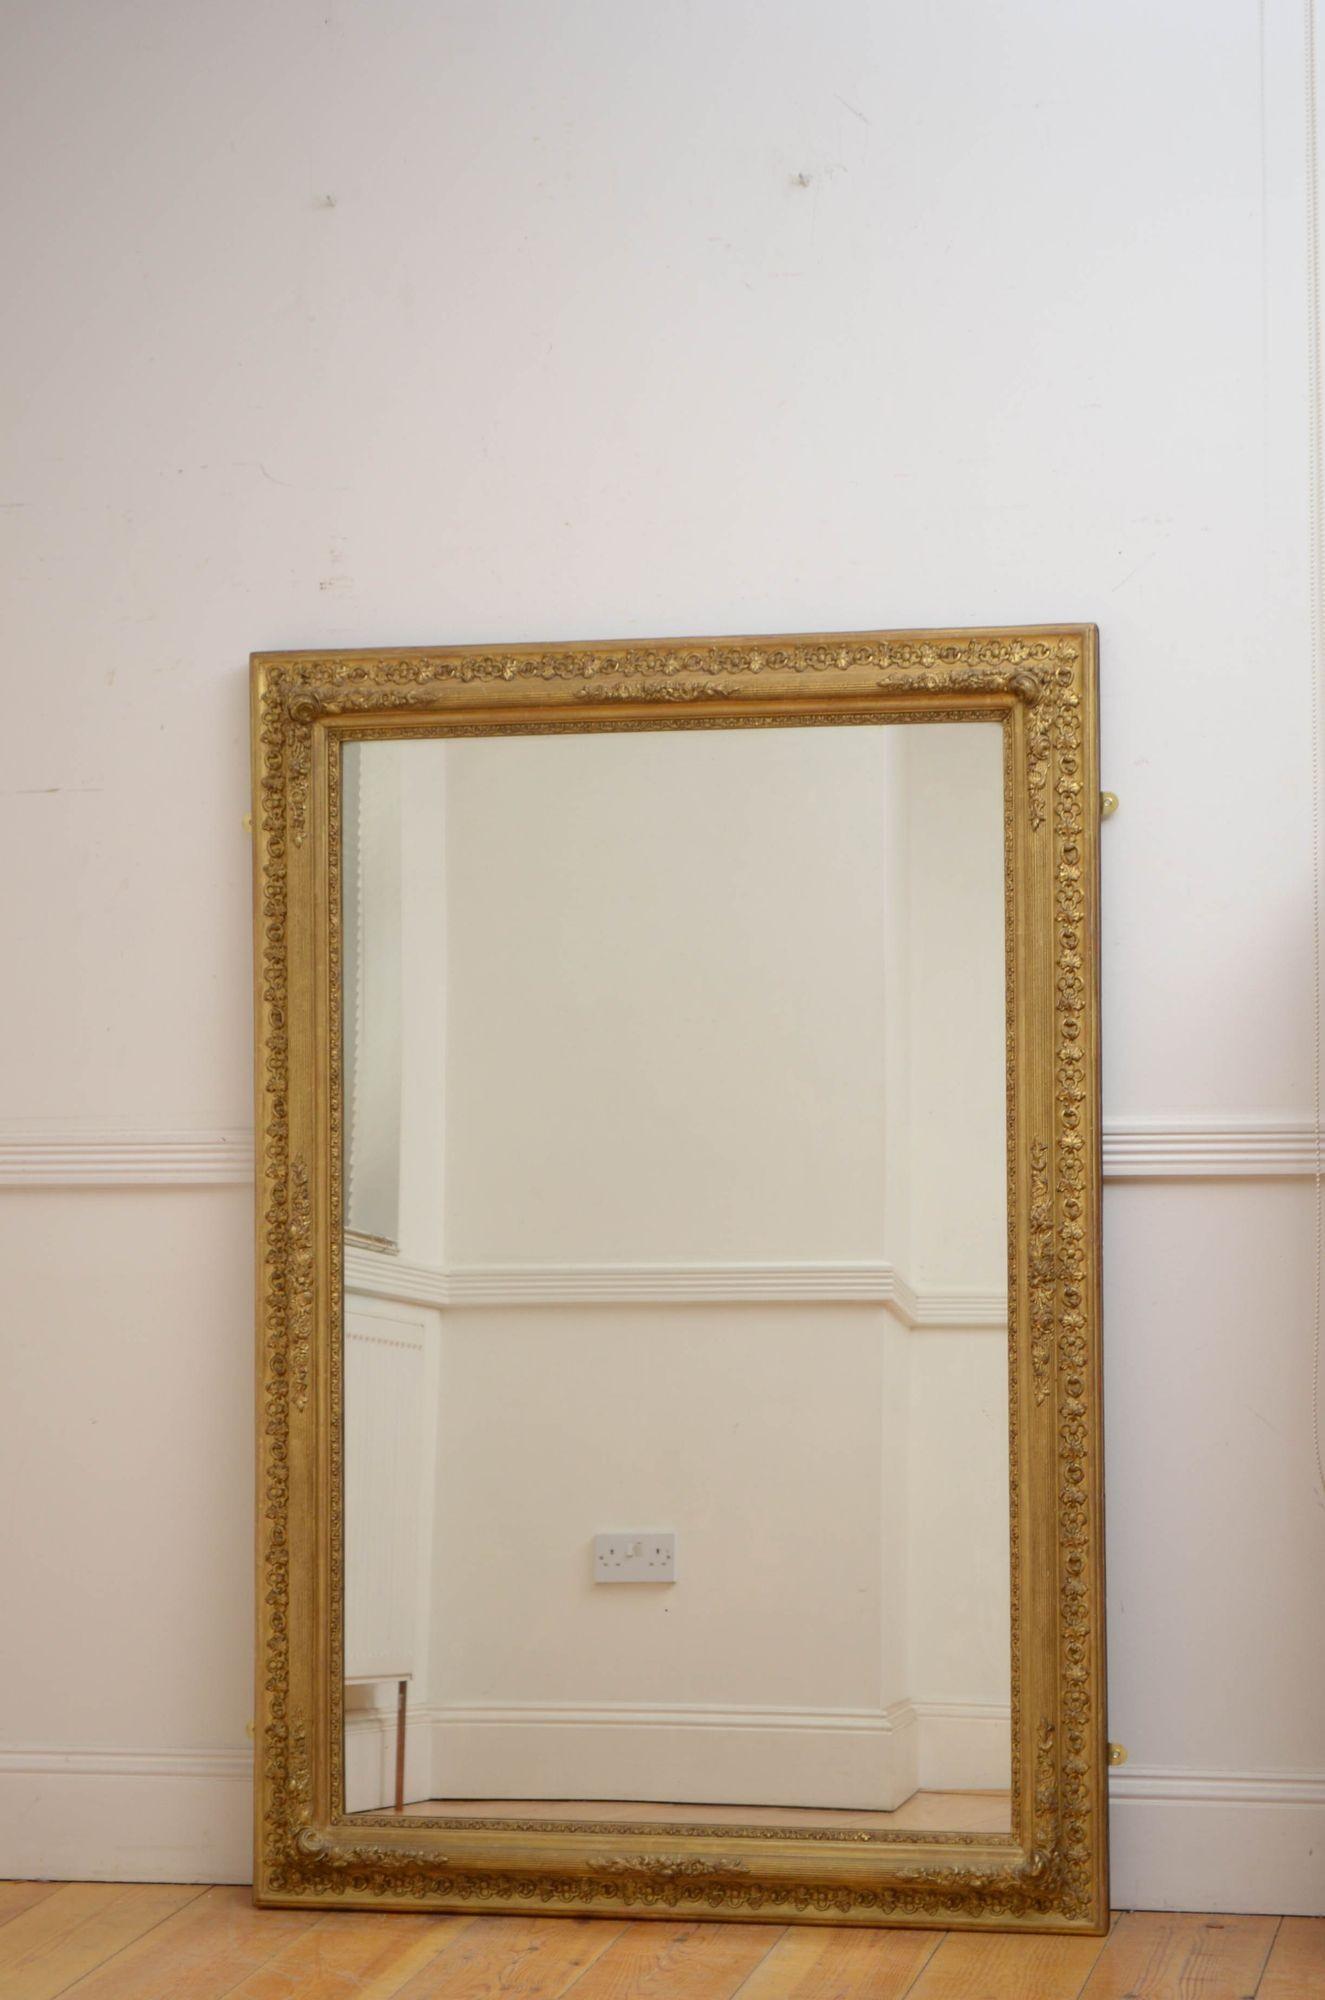 Sn5439 Outstanding French giltwood wall mirror of versatile form, can be positioned horizontally or vertically, having original glass with minor imperfection in gilded frame decorated with scroll carving to inner edge, reeded column with floral